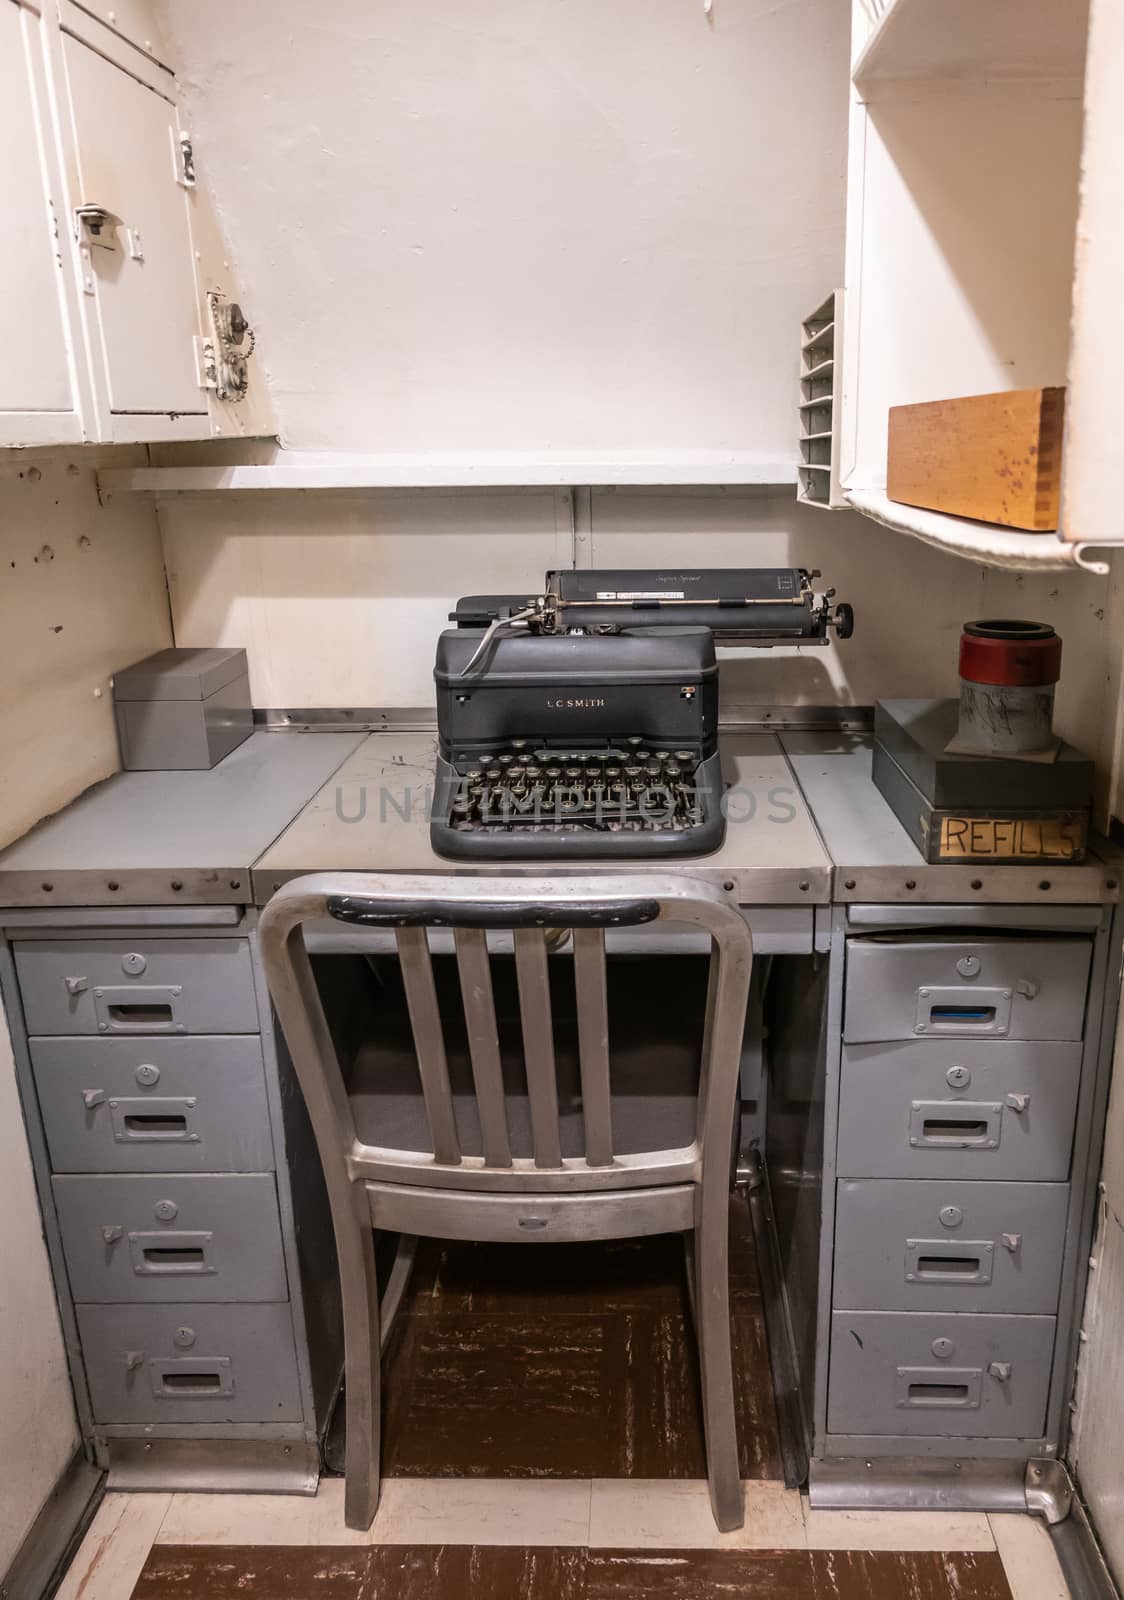 Oahu, Hawaii, USA. - January 10, 2020: Pearl Harbor. Small gray metal office desk with typewriter in long submarine USS Bowfin.